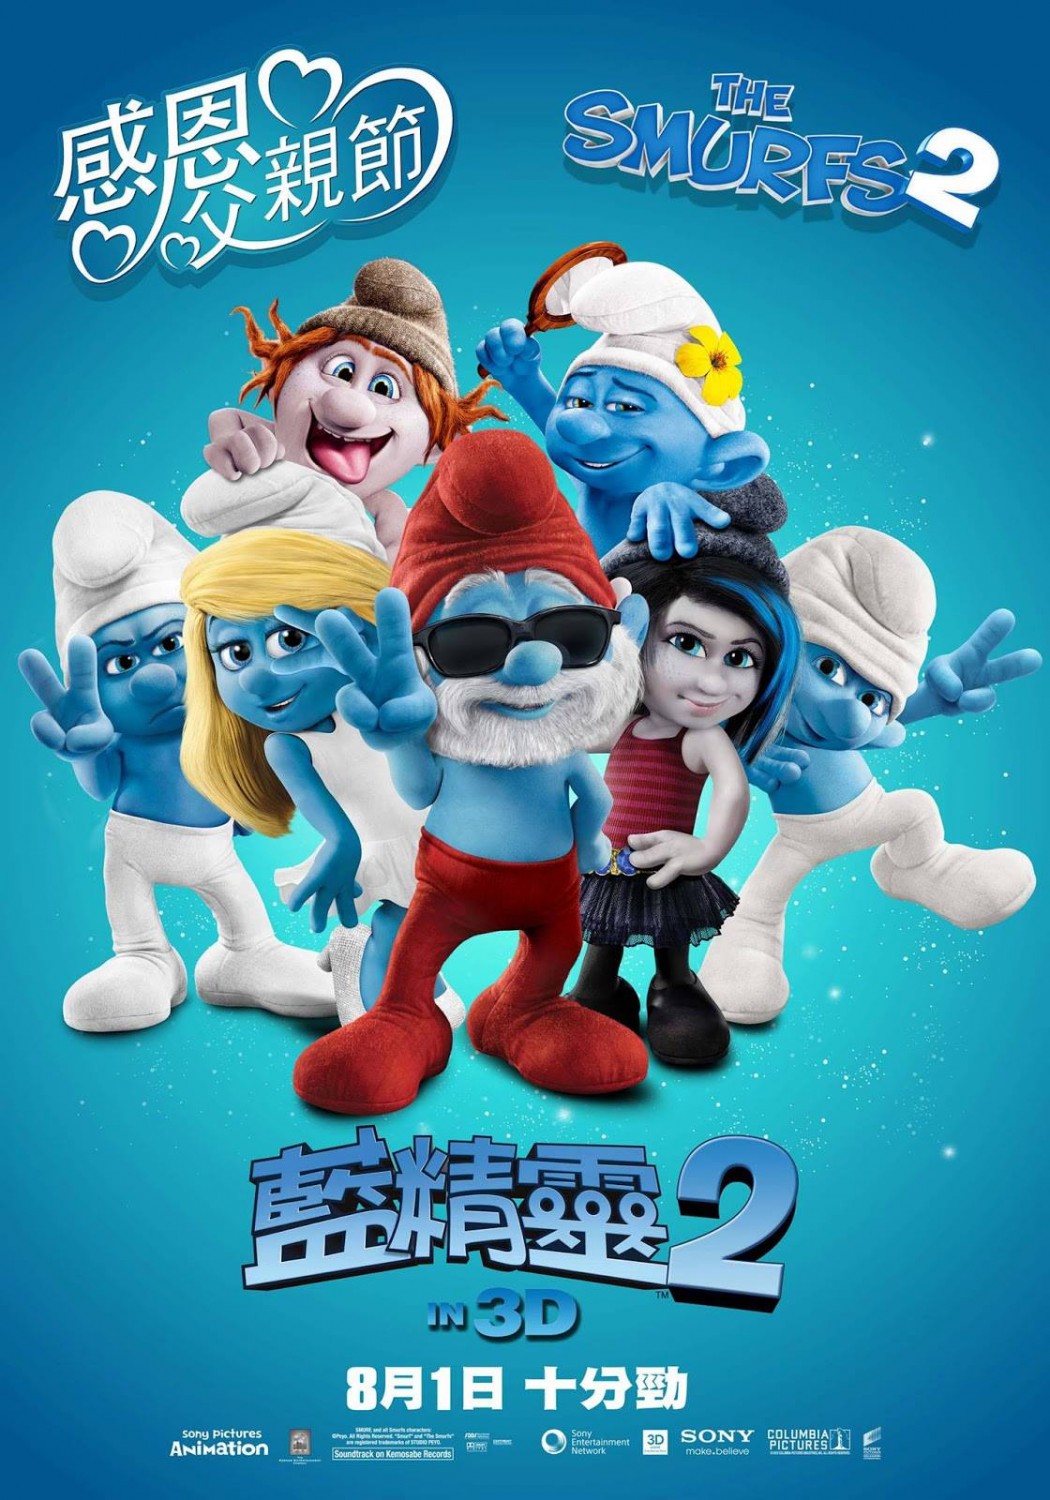 Extra Large Movie Poster Image for The Smurfs 2 (#18 of 21)